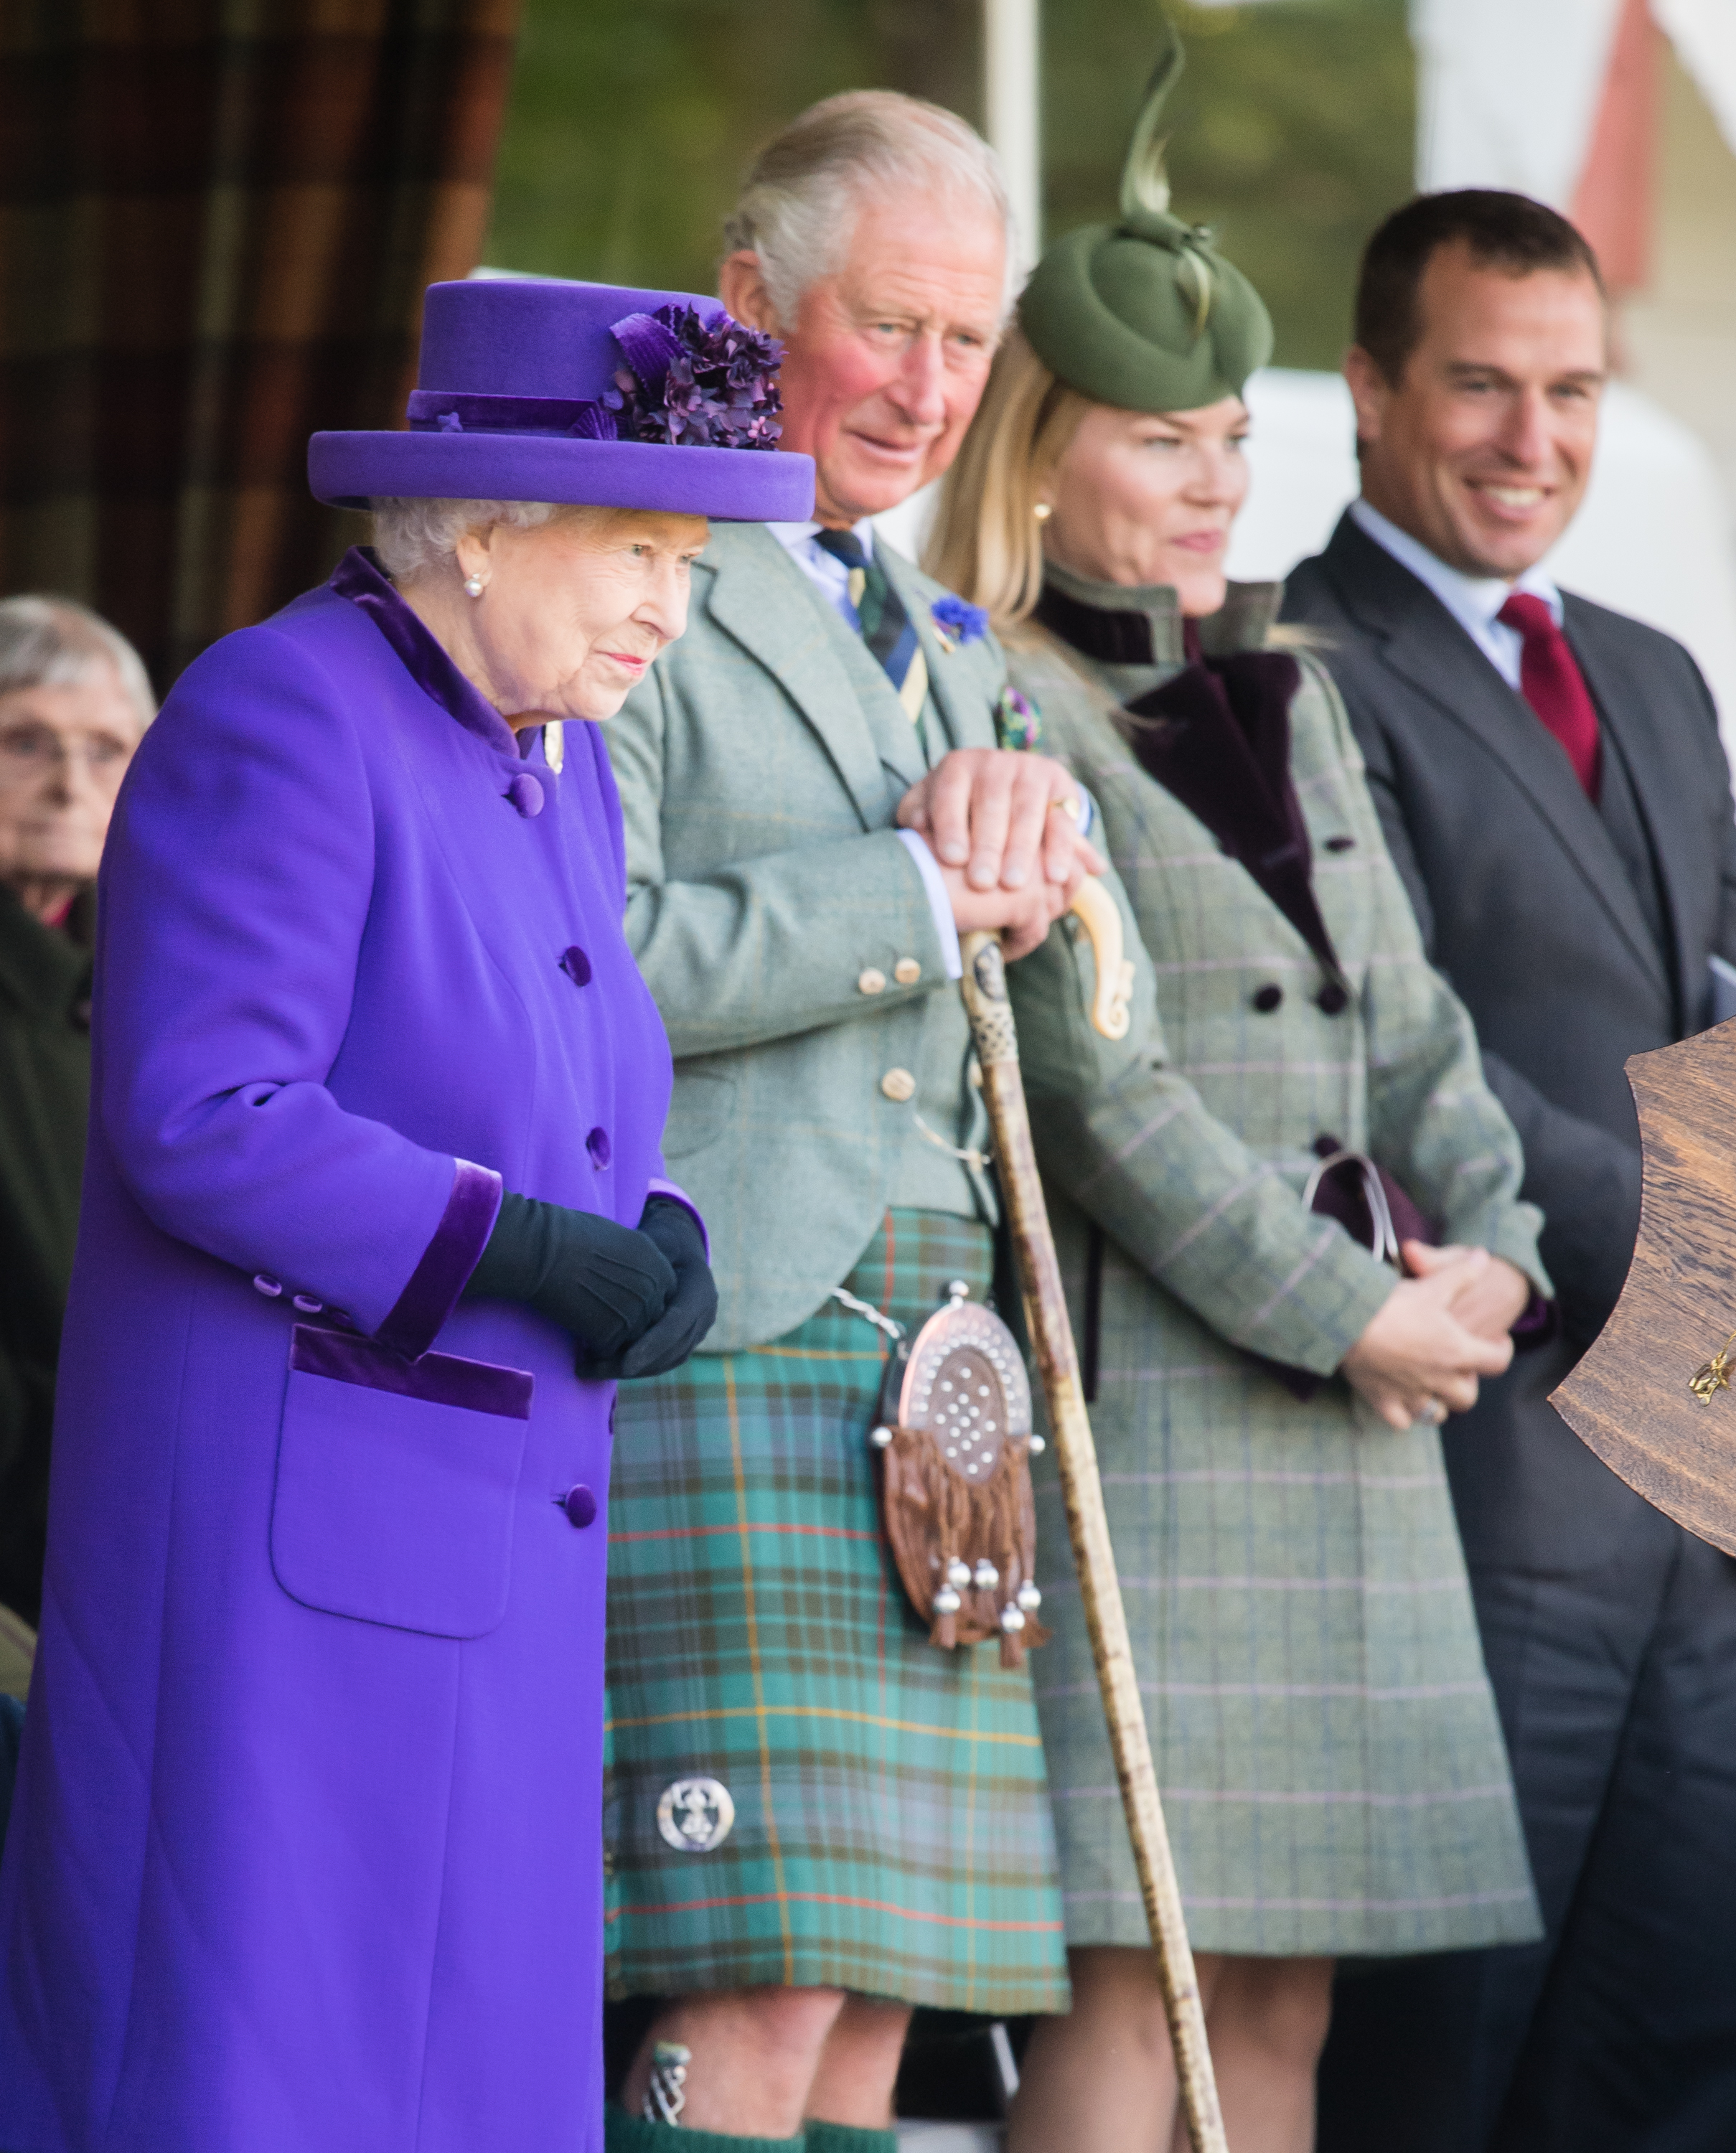 <p>Queen Elizabeth II, son Prince Charles and grandson Peter Phillips, along with Peter's then-wife Autumn Phillips, attended the 2019 Braemar Highland Games in Braemar, Scotland, on Sept. 7, 2019. </p>